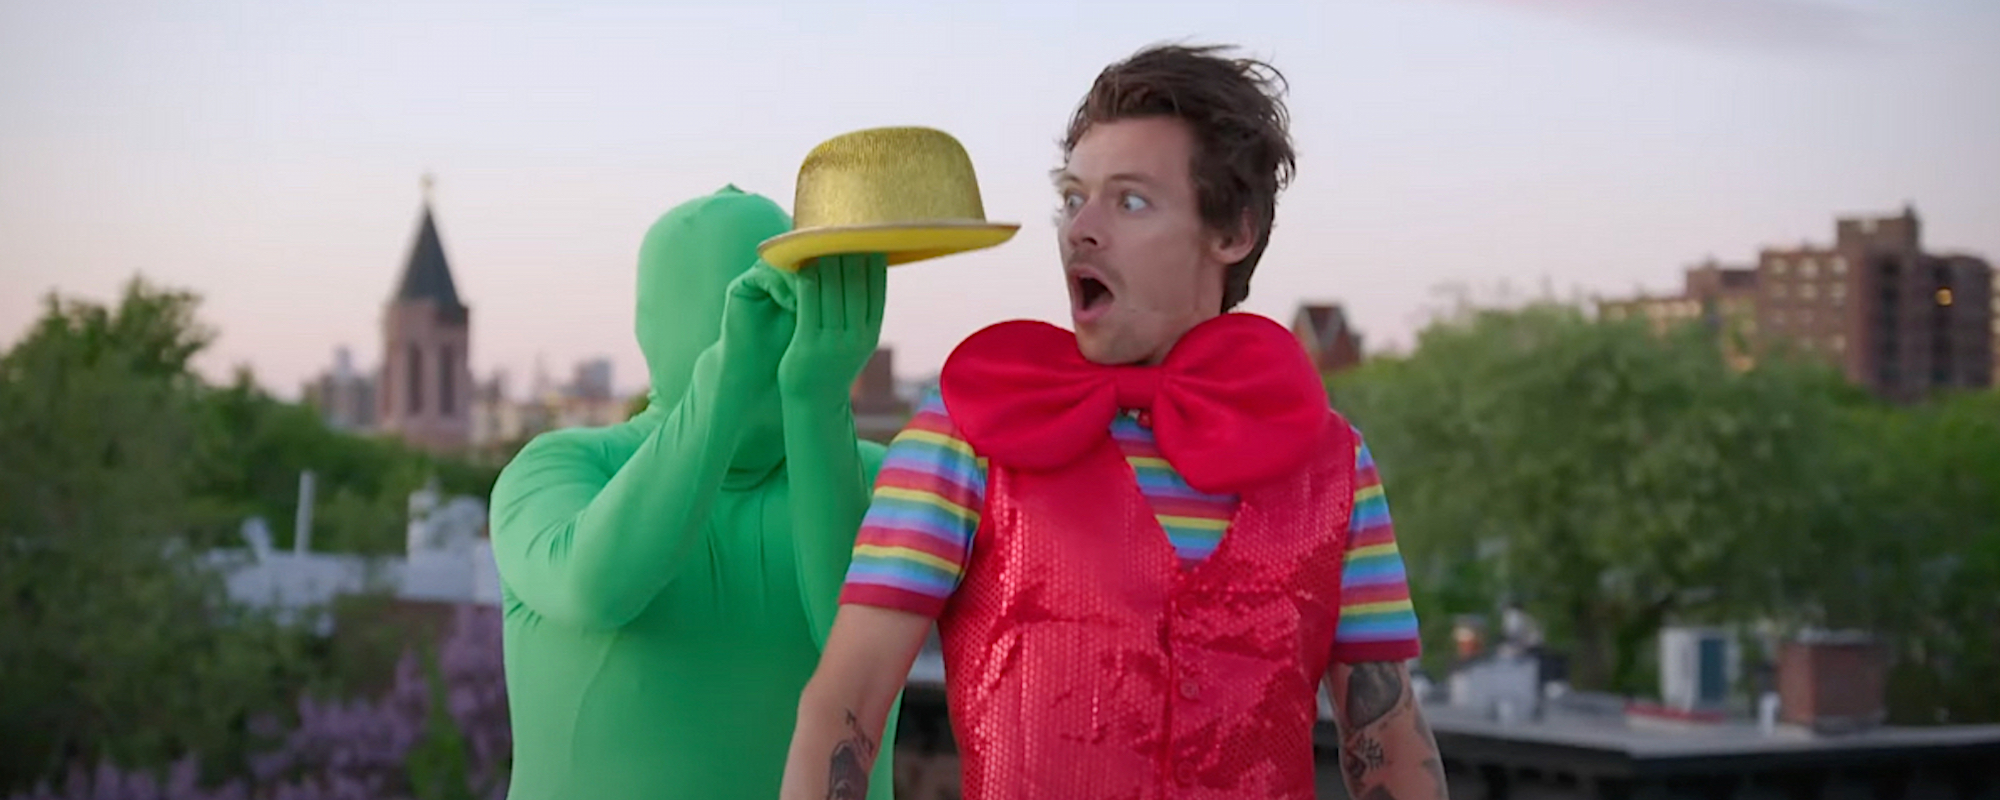 Harry Styles Makes $300 Music Video in a Brooklyn Apartment with James Corden